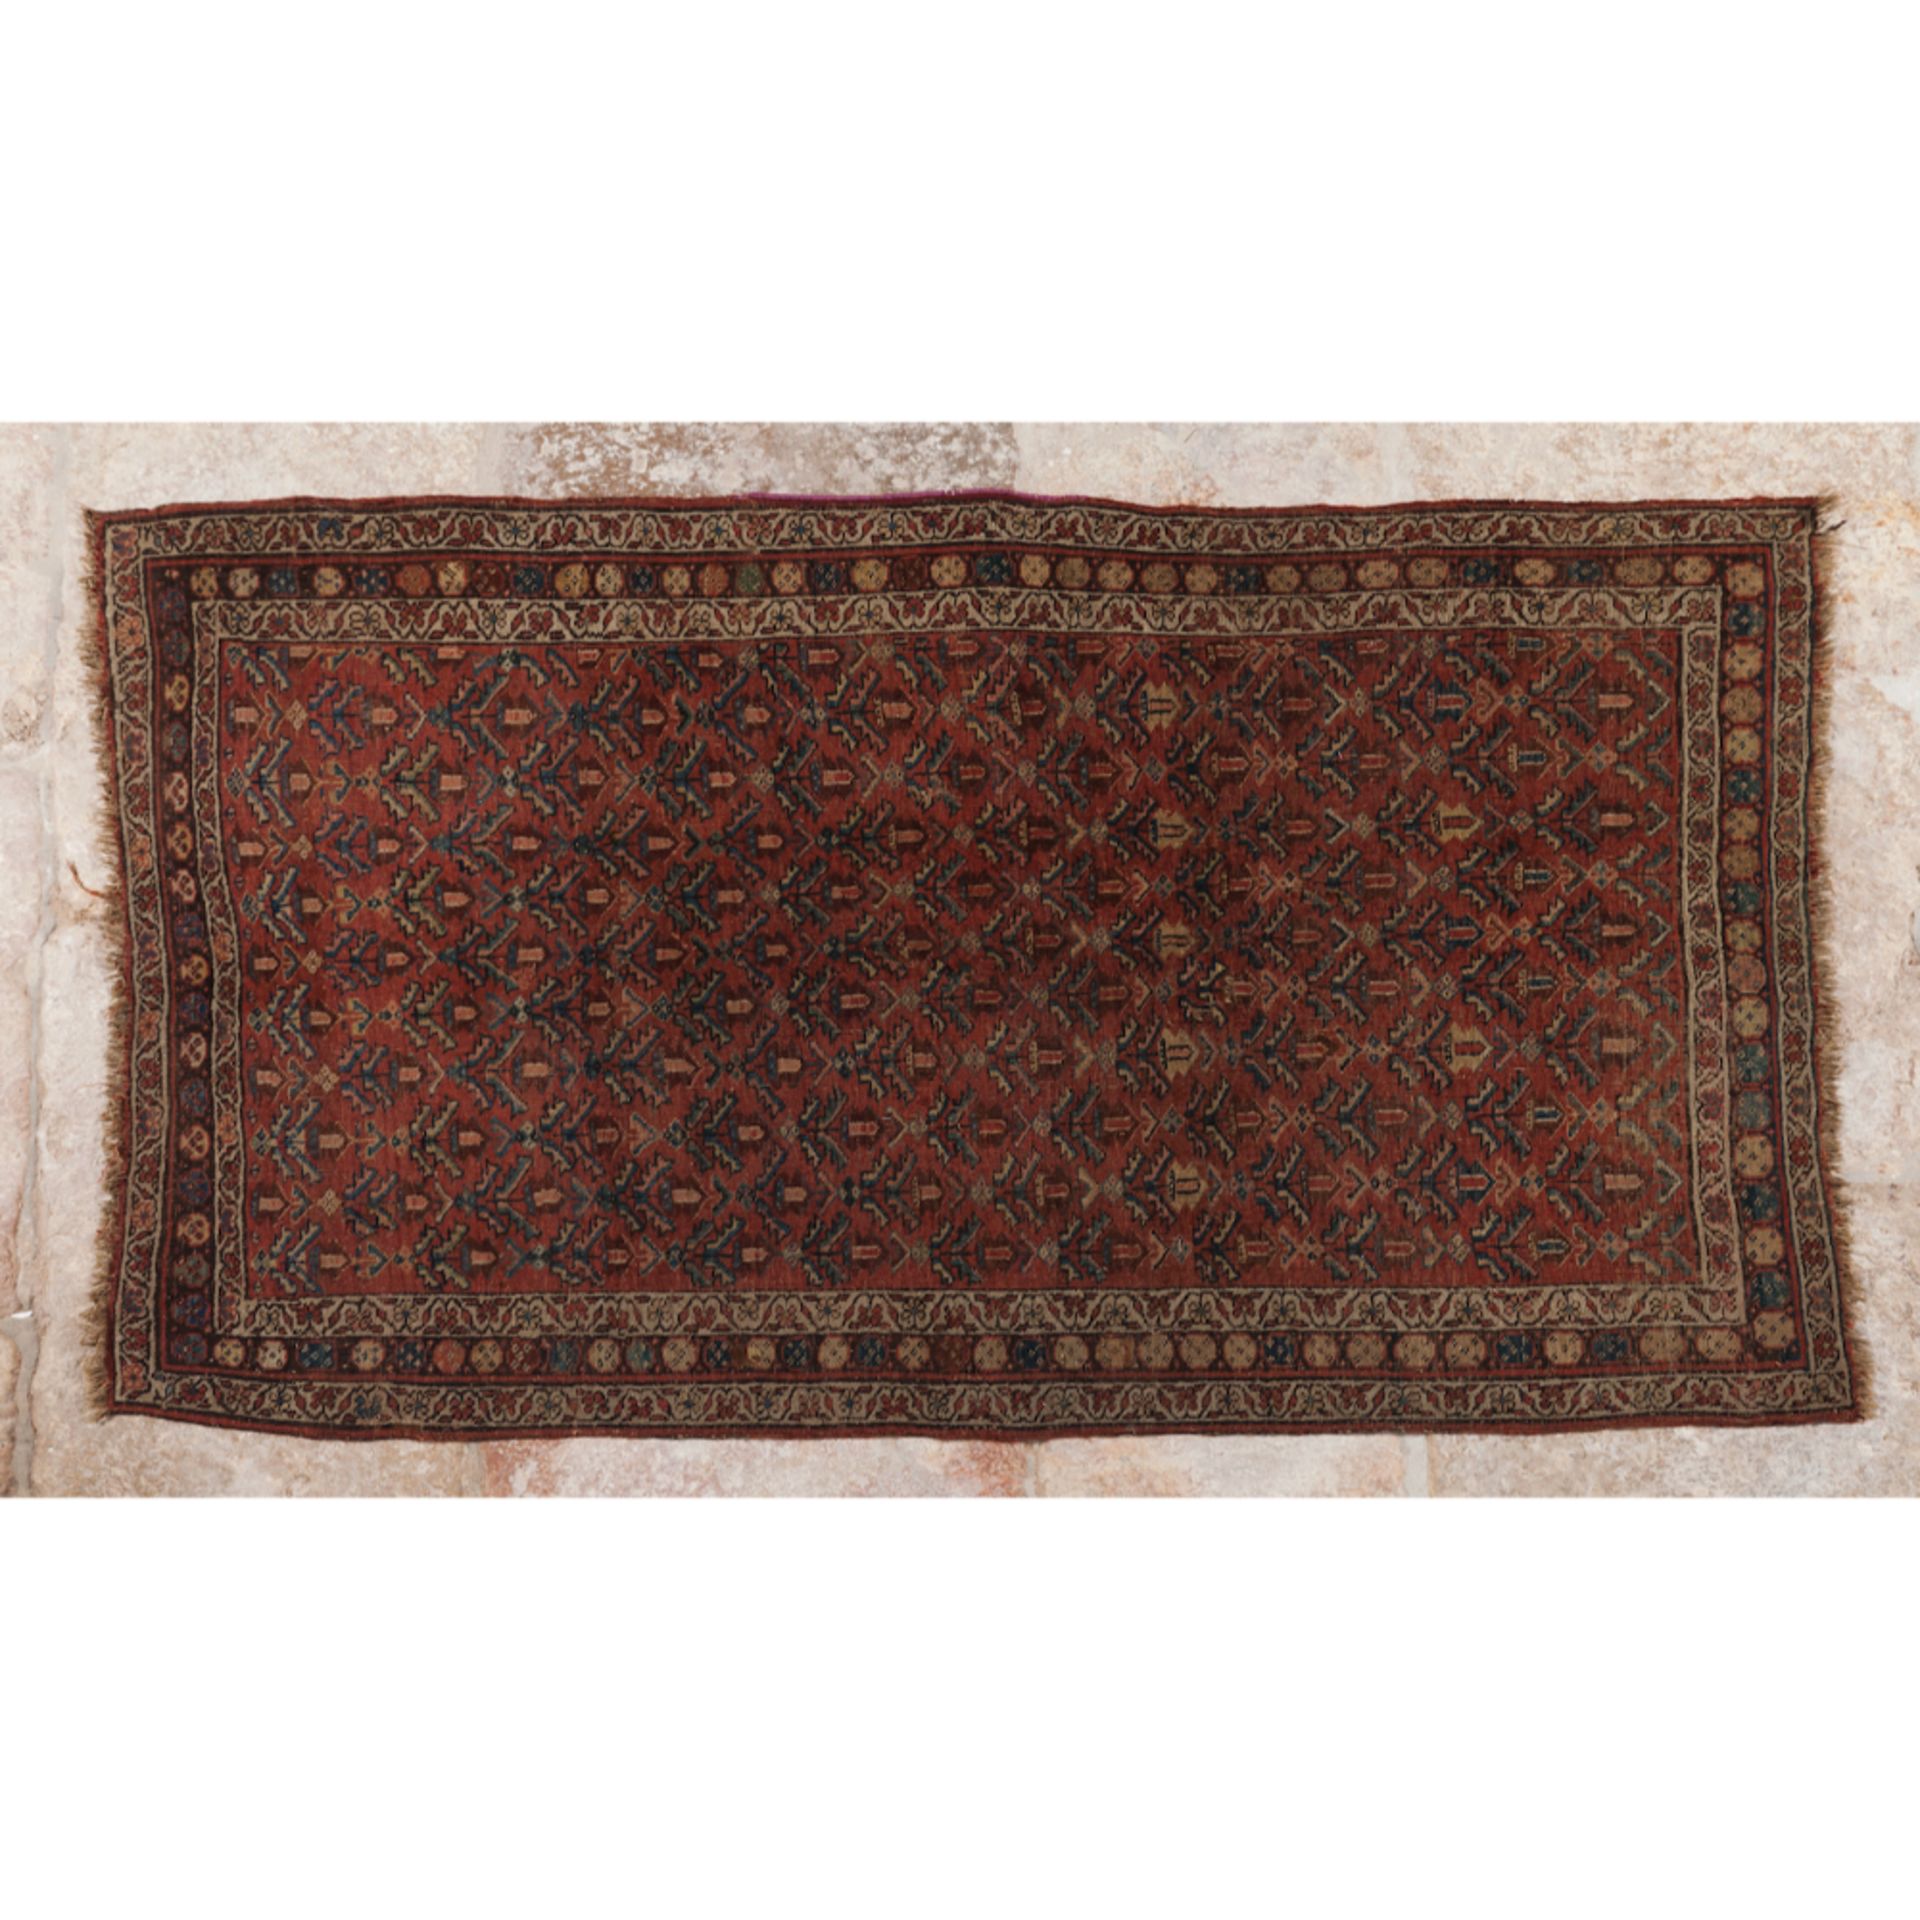 A Sivas rug, TurkishWool In wood and cotton Floral design in shades of burgundy, blue, beige and